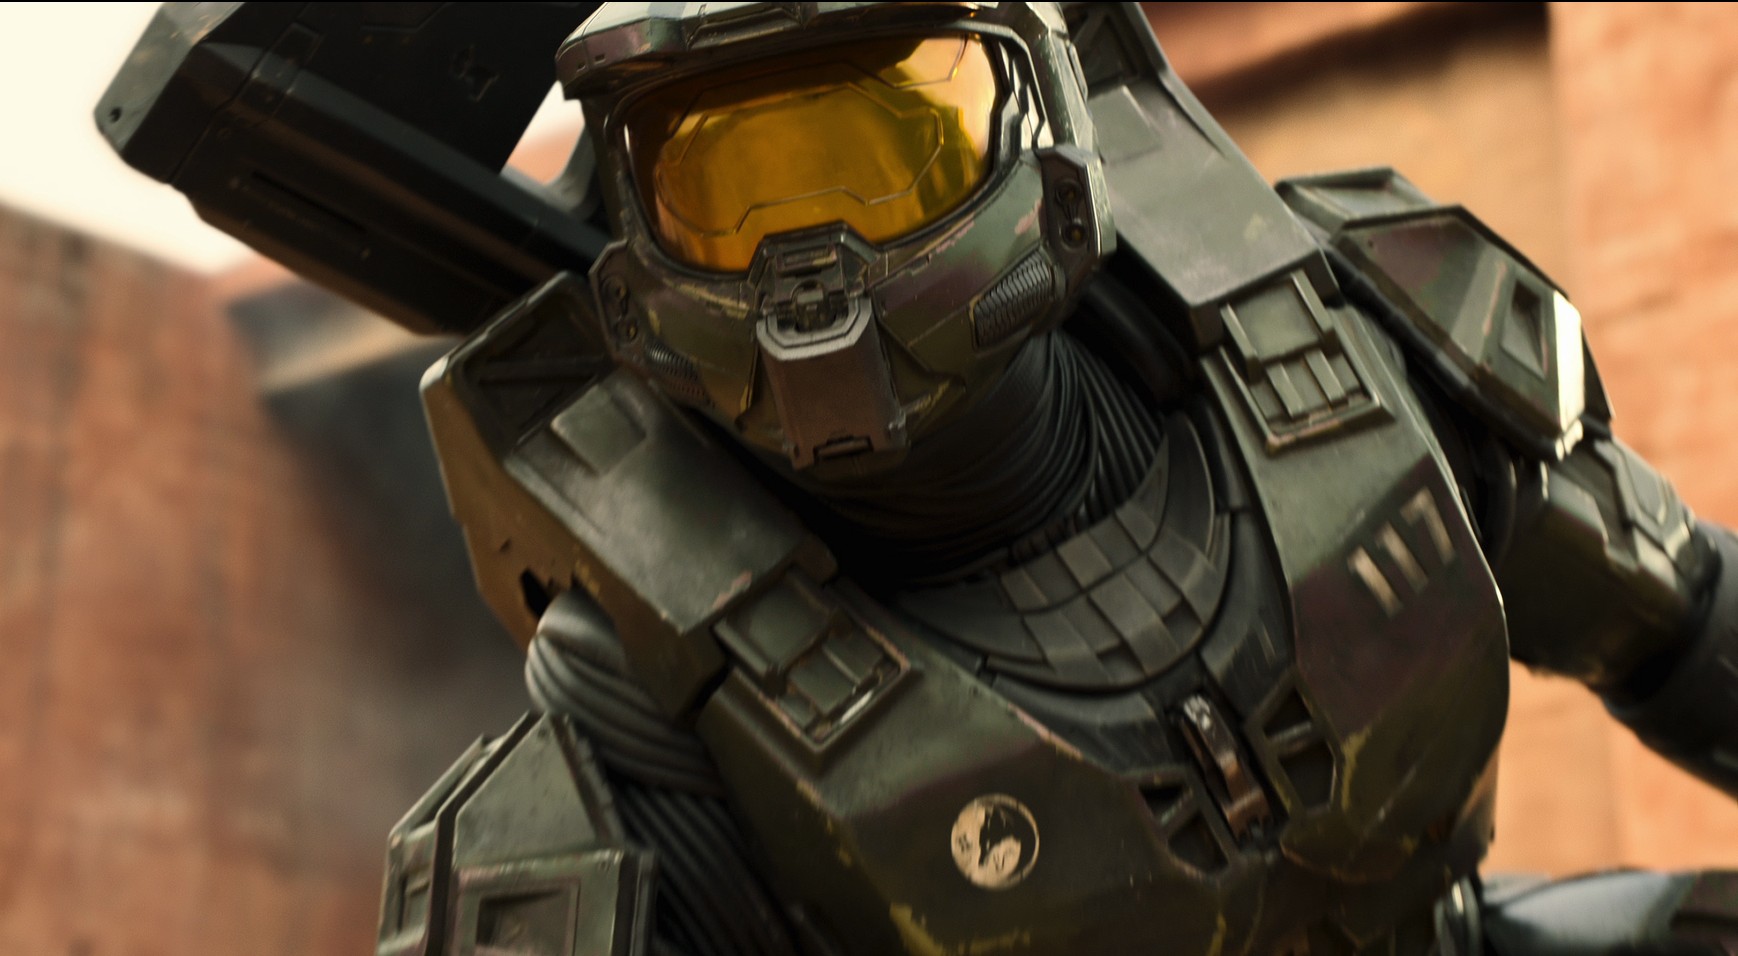 Halo' TV series review: A humanized Master Chief's trauma fuels a